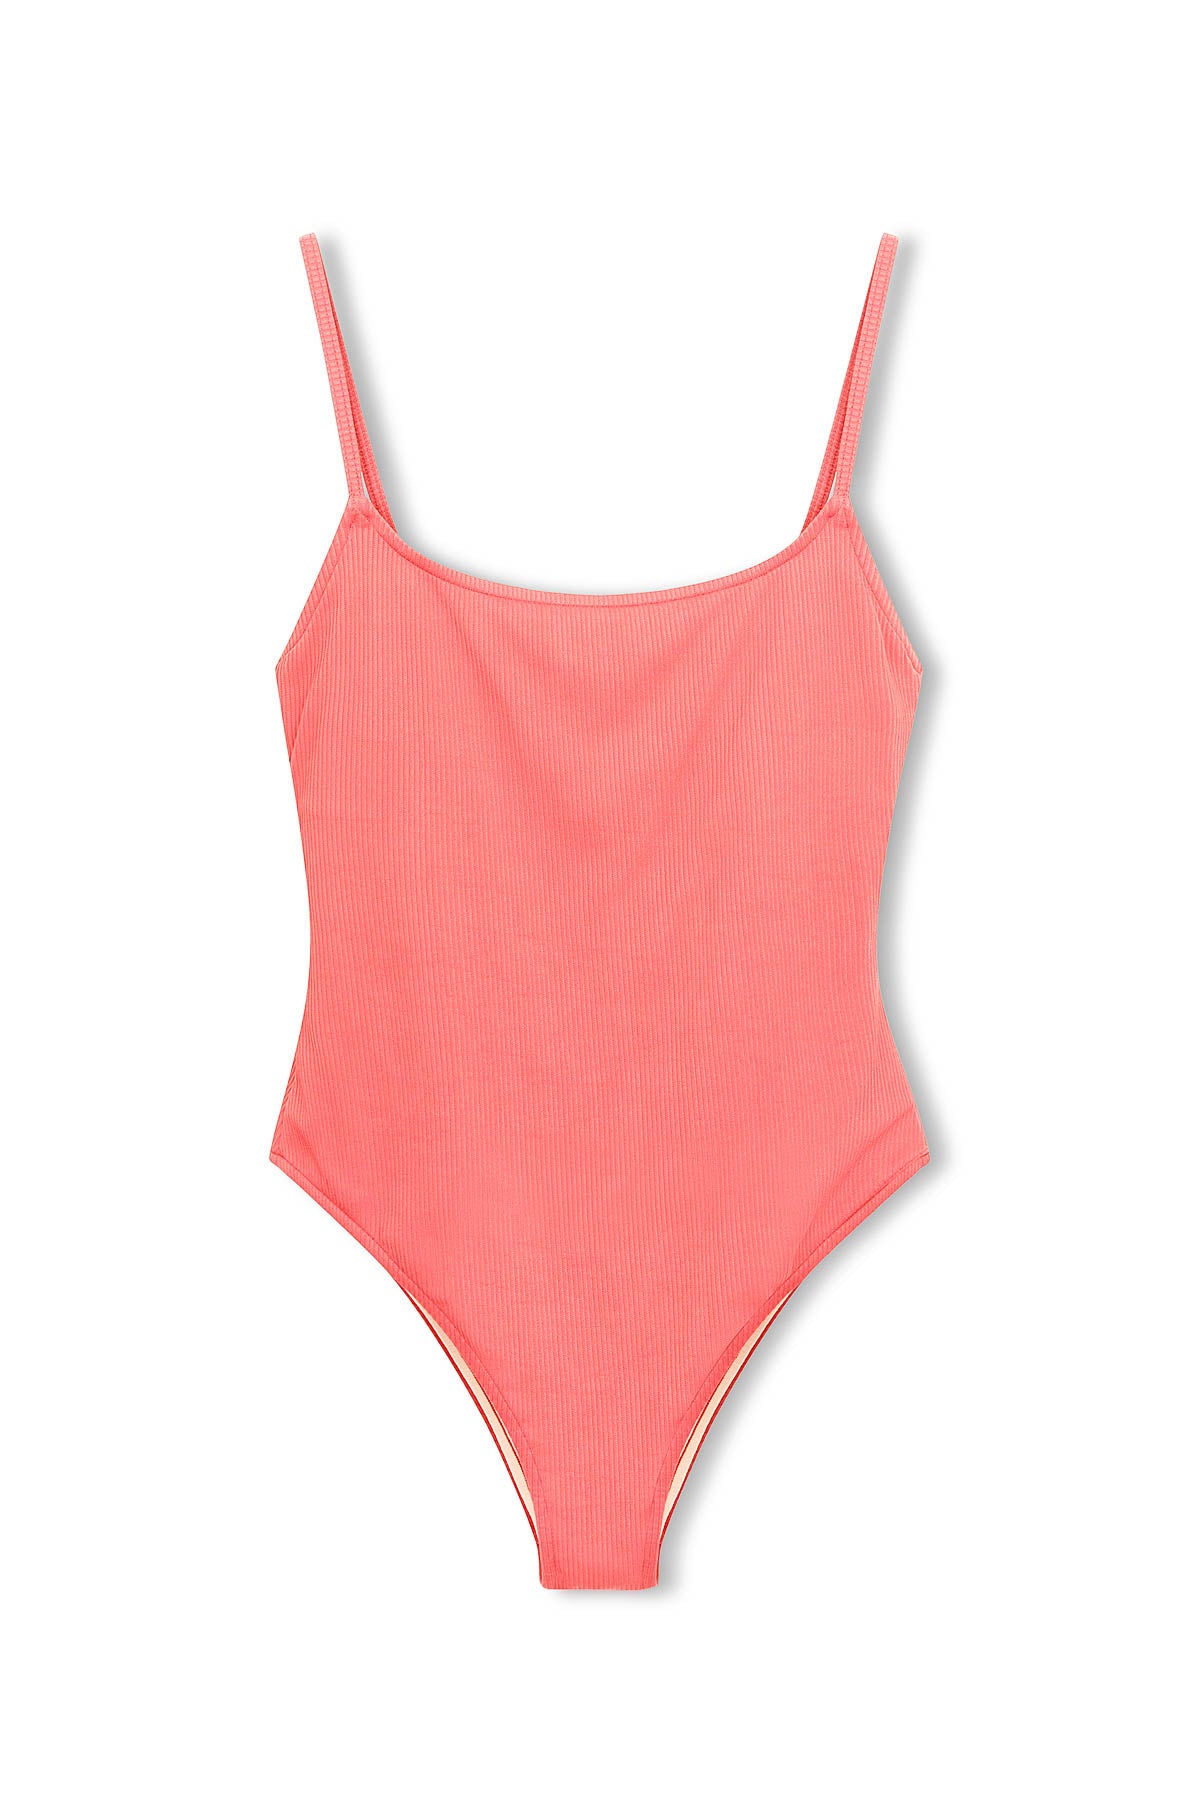 CHLORINE RESISTANT KRINKLE TEXTURED SOLID ACTIVE BACK ONE PIECE